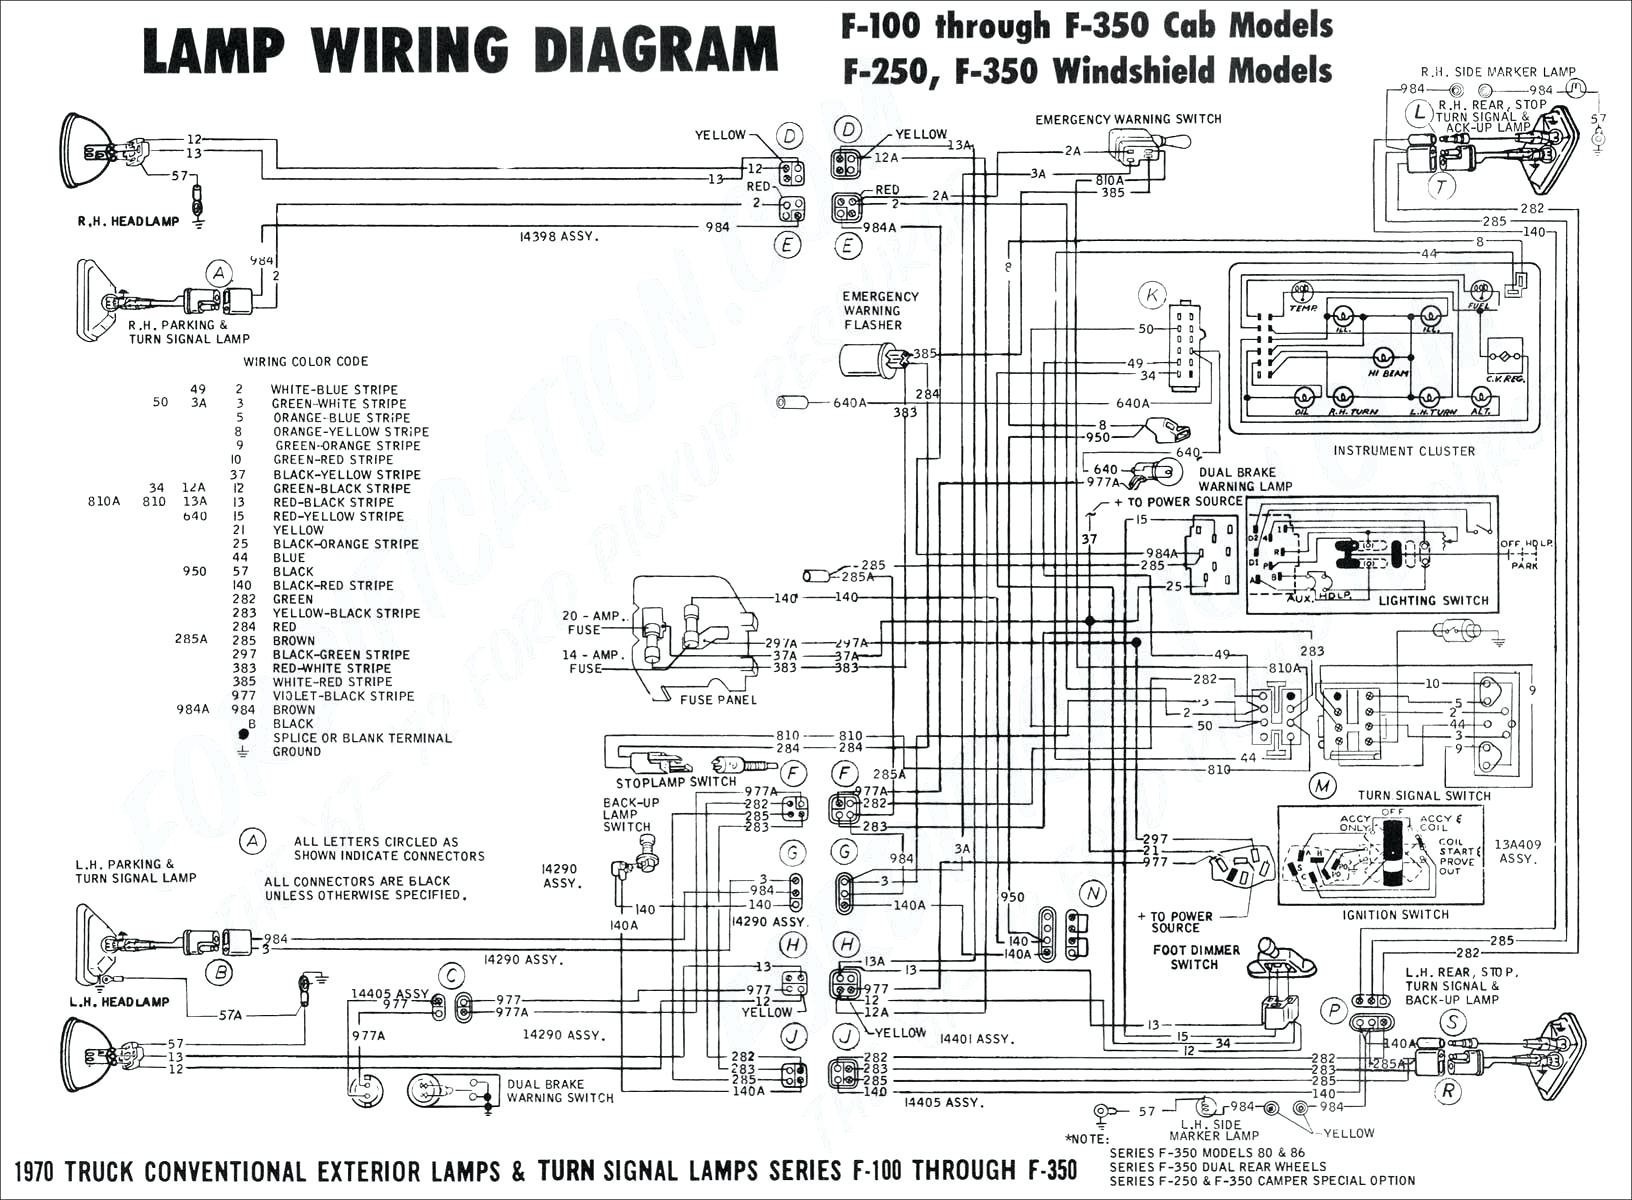 Wiring Diagrams for Turn Signal Best Stop Turn Tail Light Wiring Diagram Beautiful 1979 ford F150